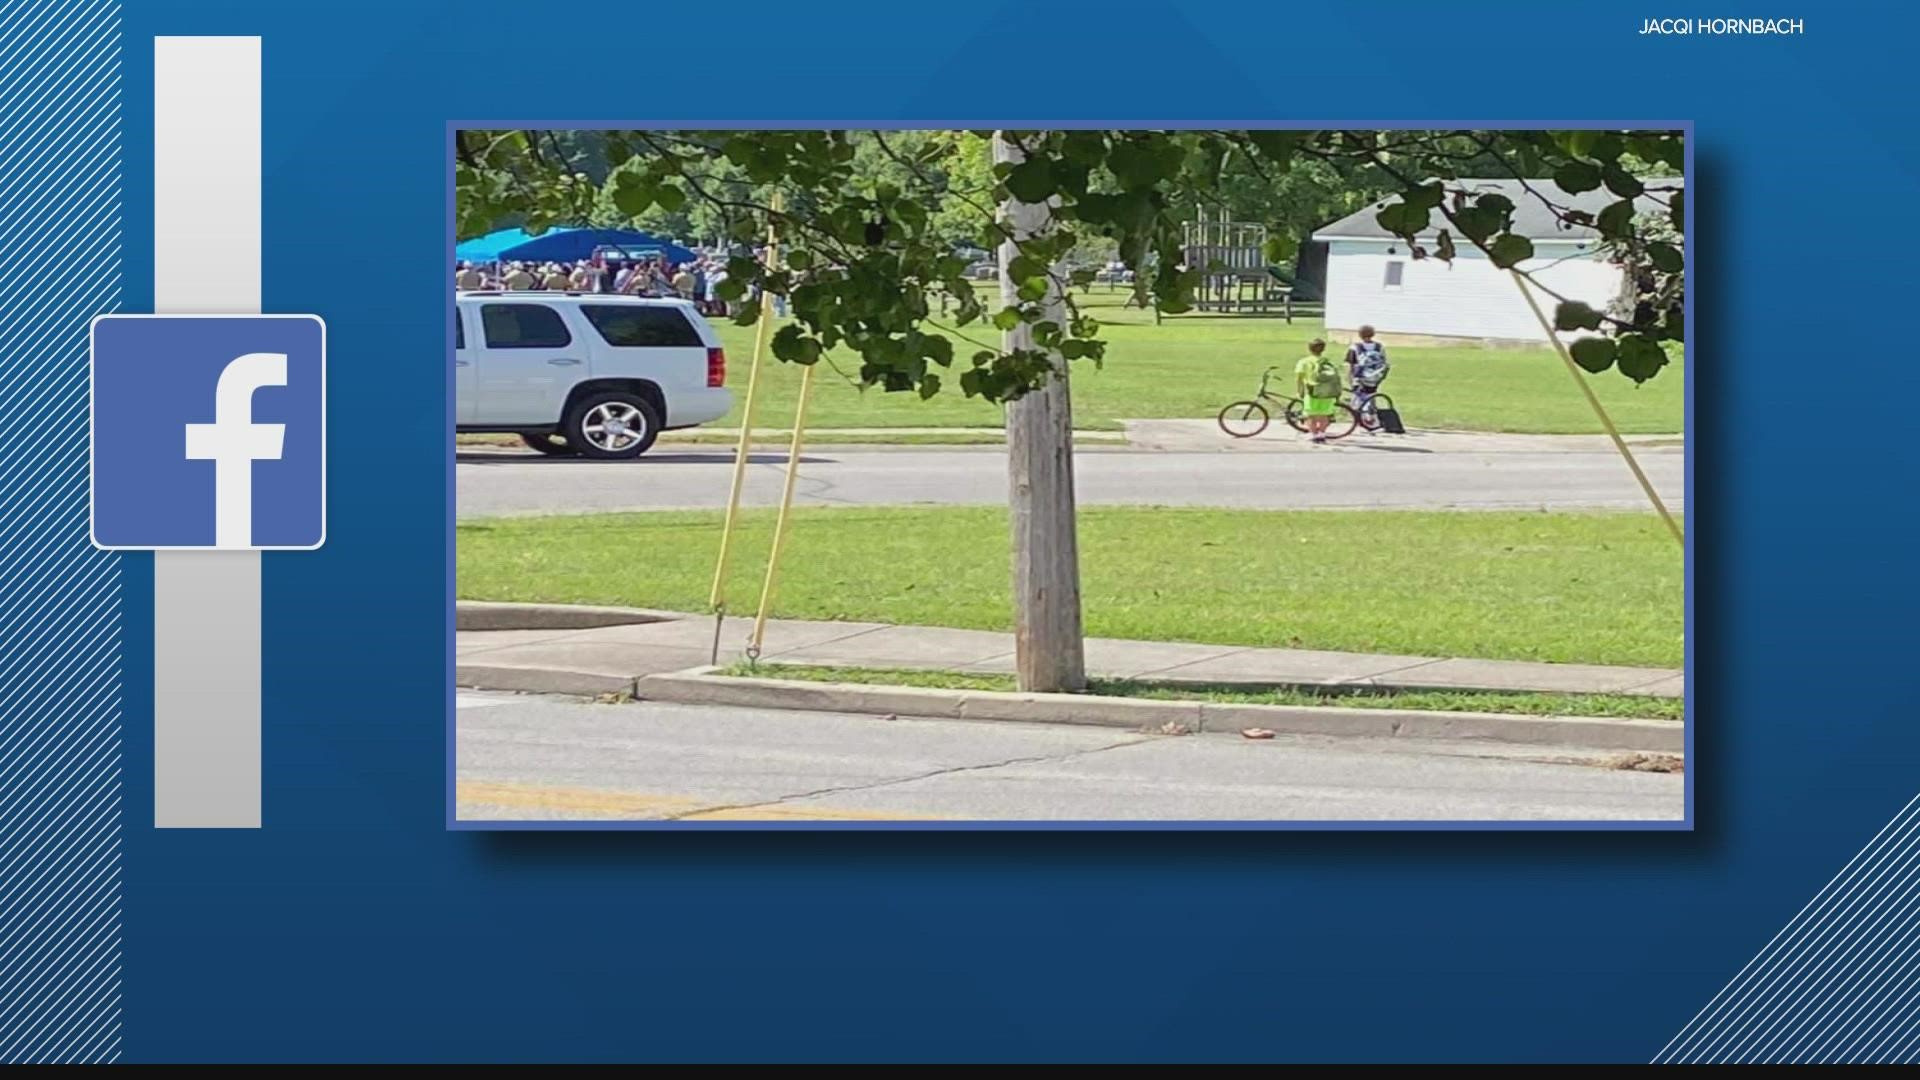 Two boys riding their bikes in Batesville stopped everything to pay their respects to a veteran's funeral.